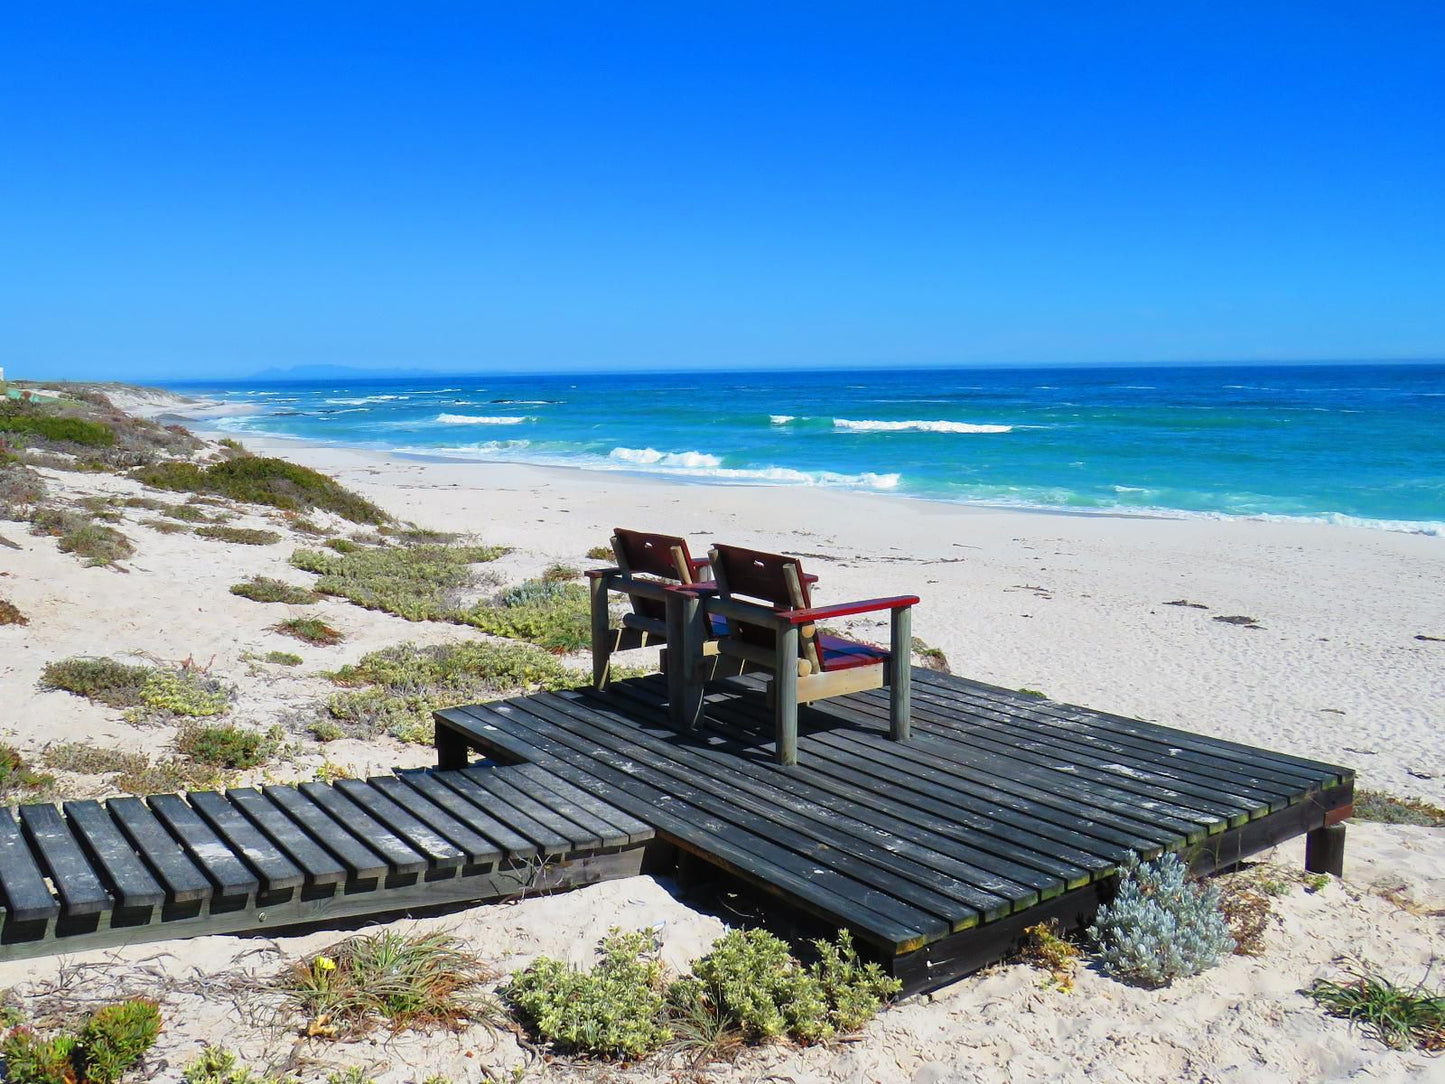 On The Beach Seabreeze Apartment Yzerfontein Western Cape South Africa Beach, Nature, Sand, Ocean, Waters